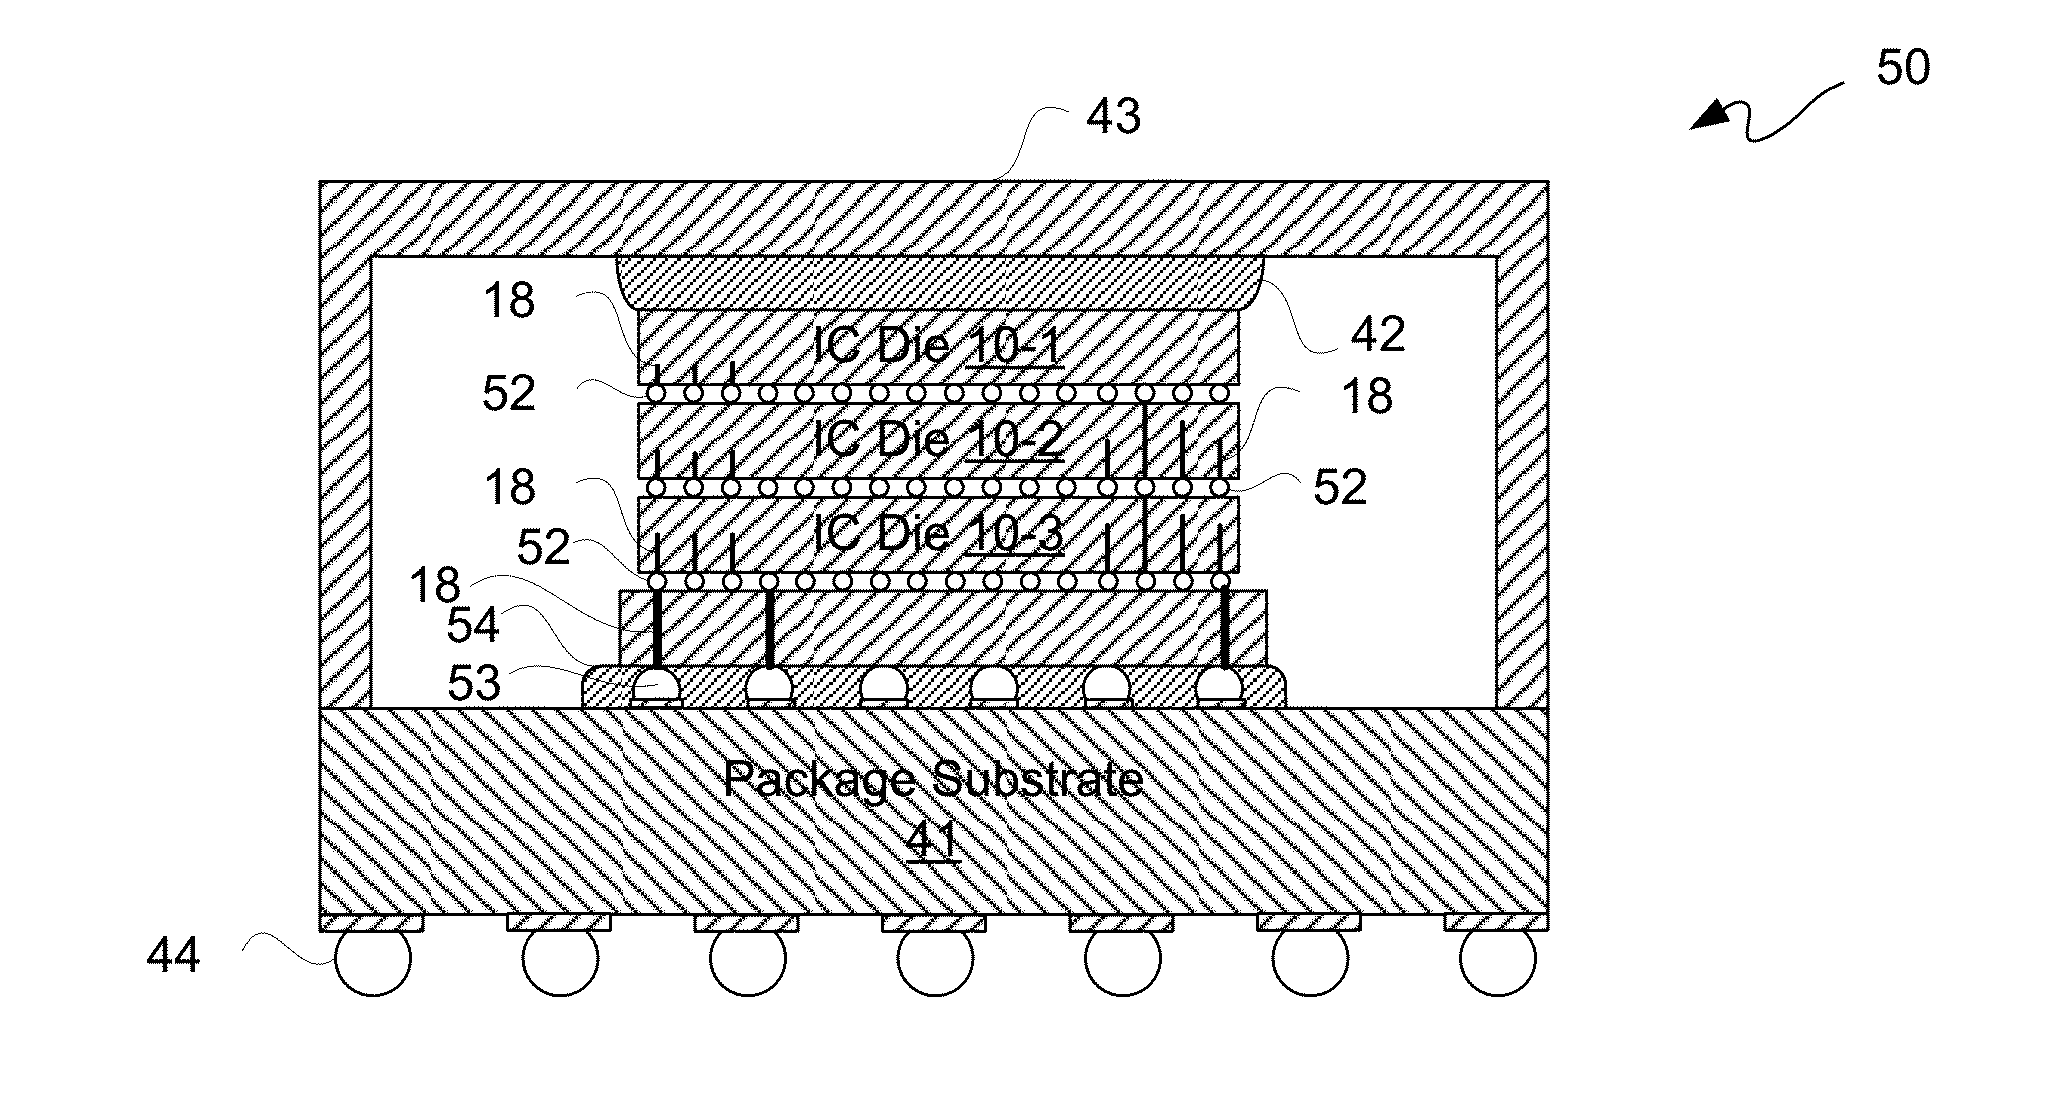 Multiple Bond Via Arrays of Different Wire Heights on a Same Substrate